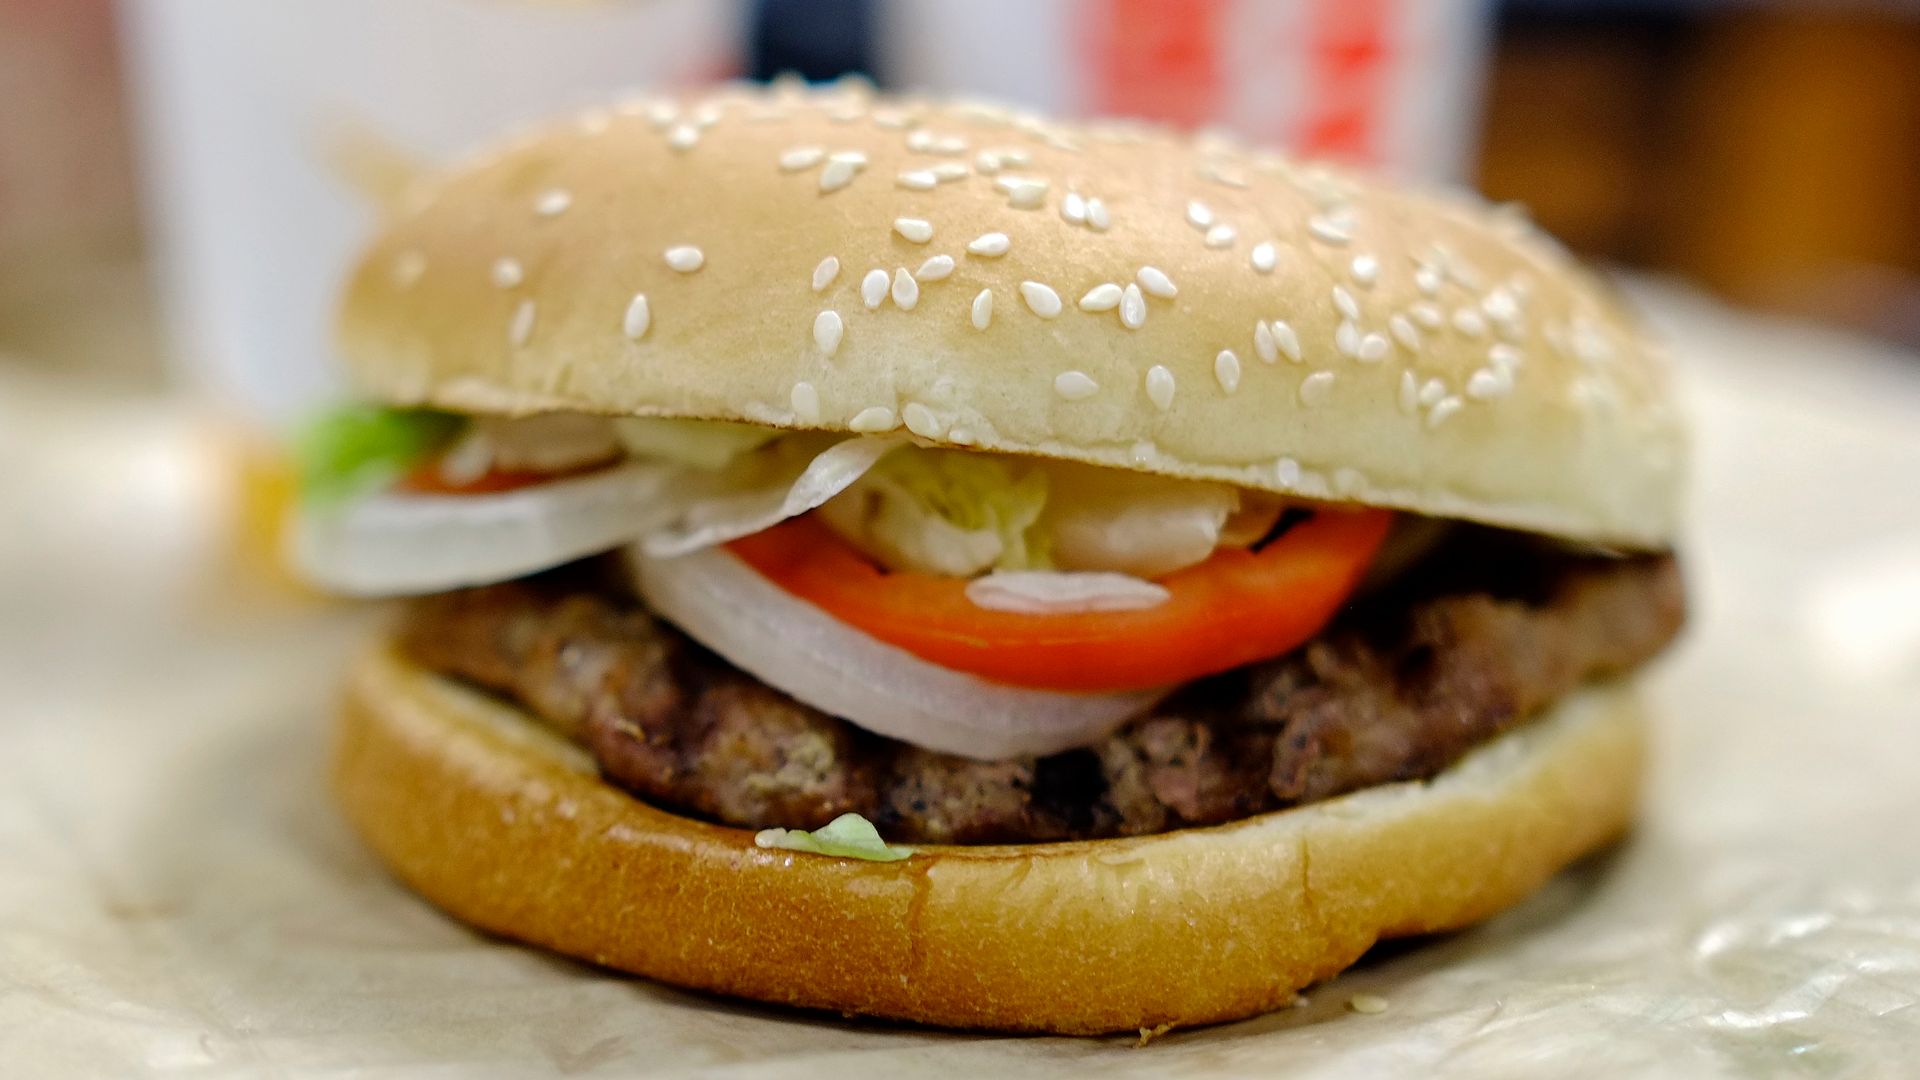 A judge rejected Burger King's bid to dismiss a lawsuit claiming the company makes its signature Whopper appear larger than it actually is.